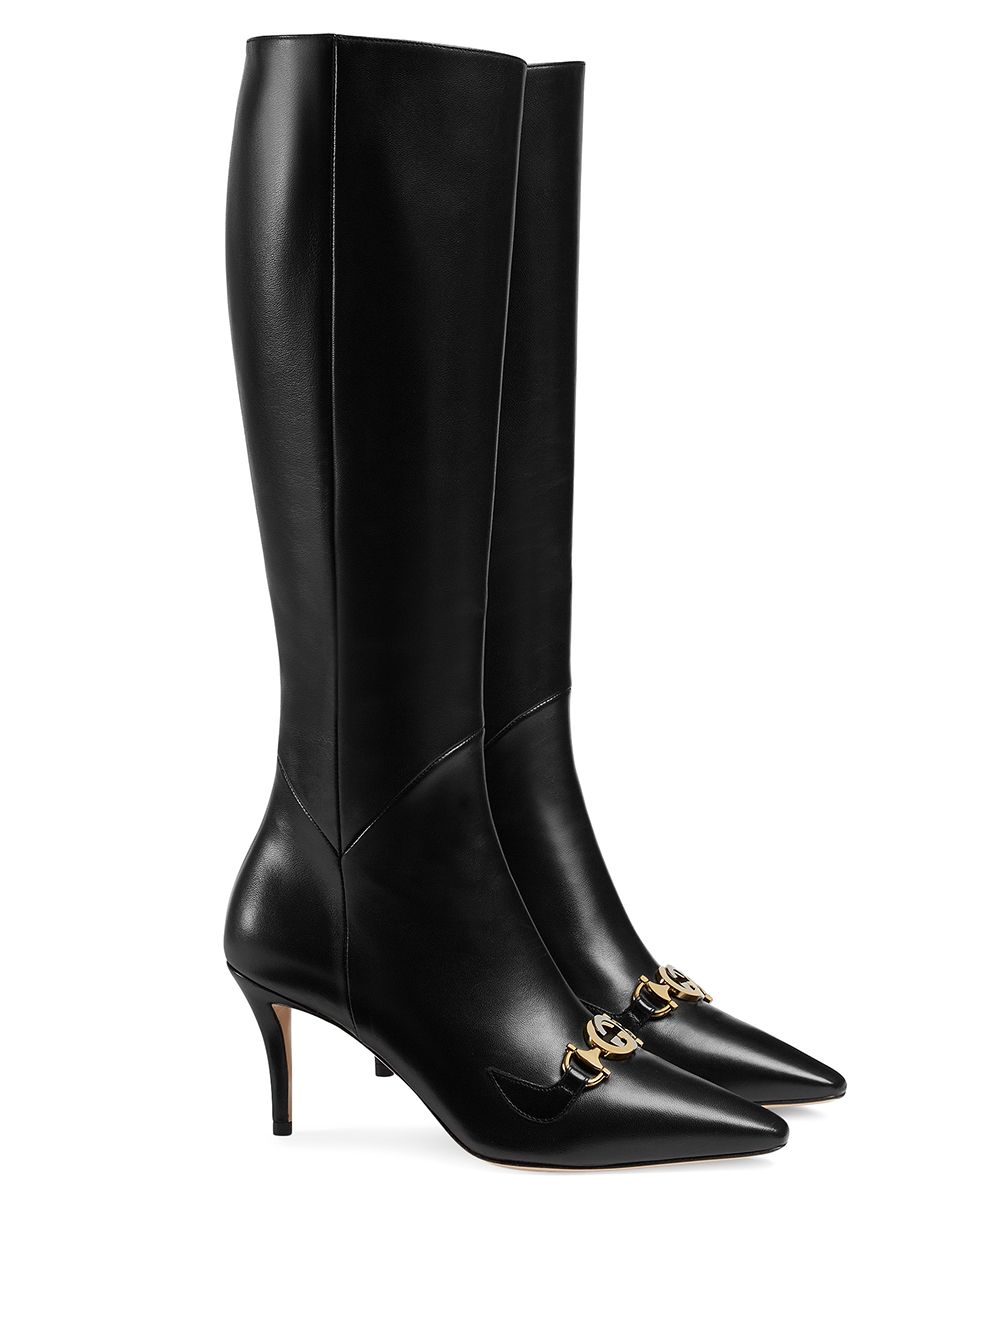 Shop black Gucci Zumi high boots with 